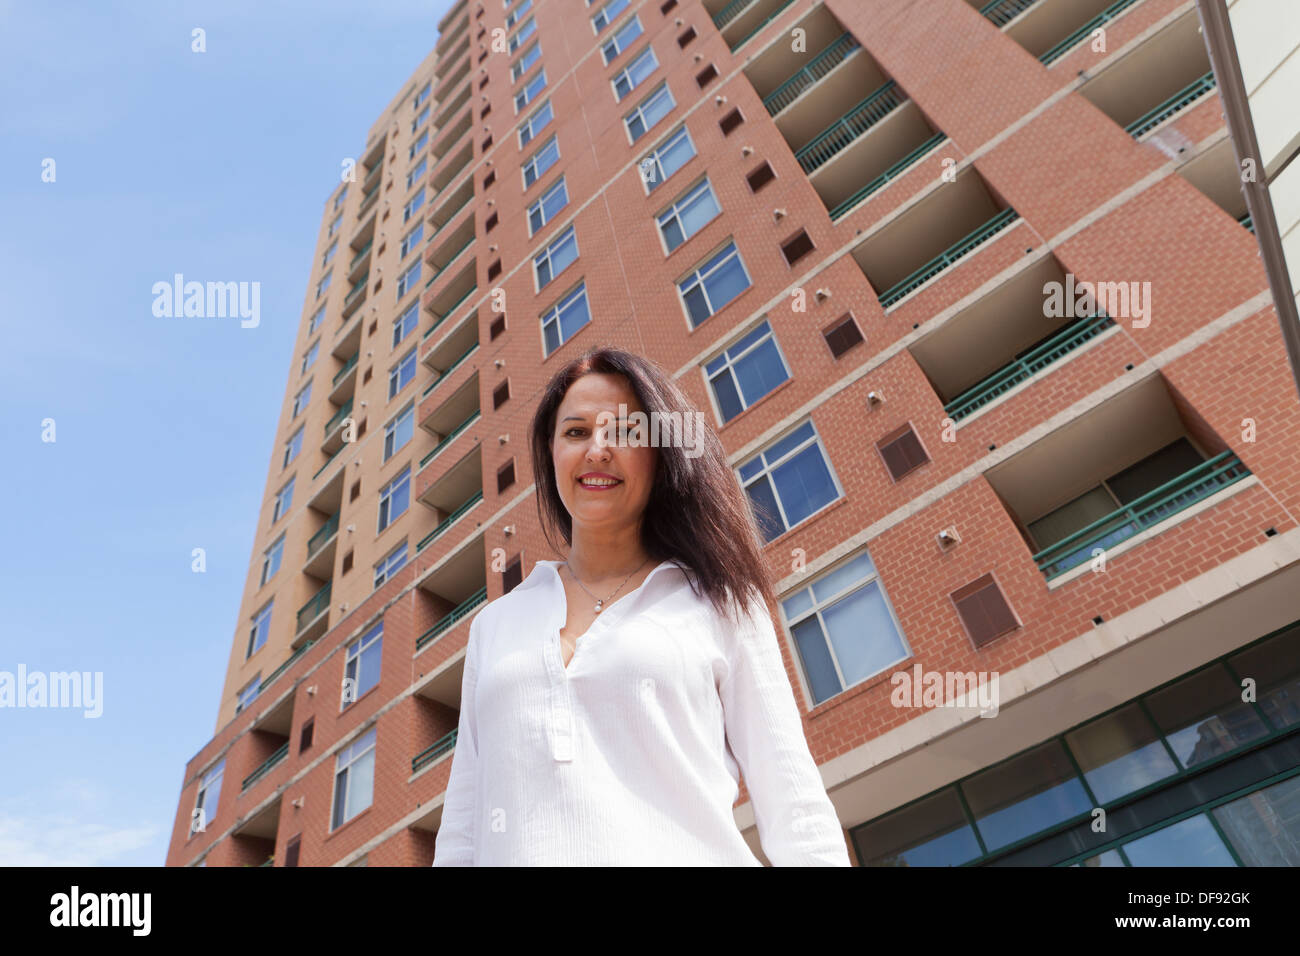 Middle aged Caucasian woman standing in front of building Stock Photo